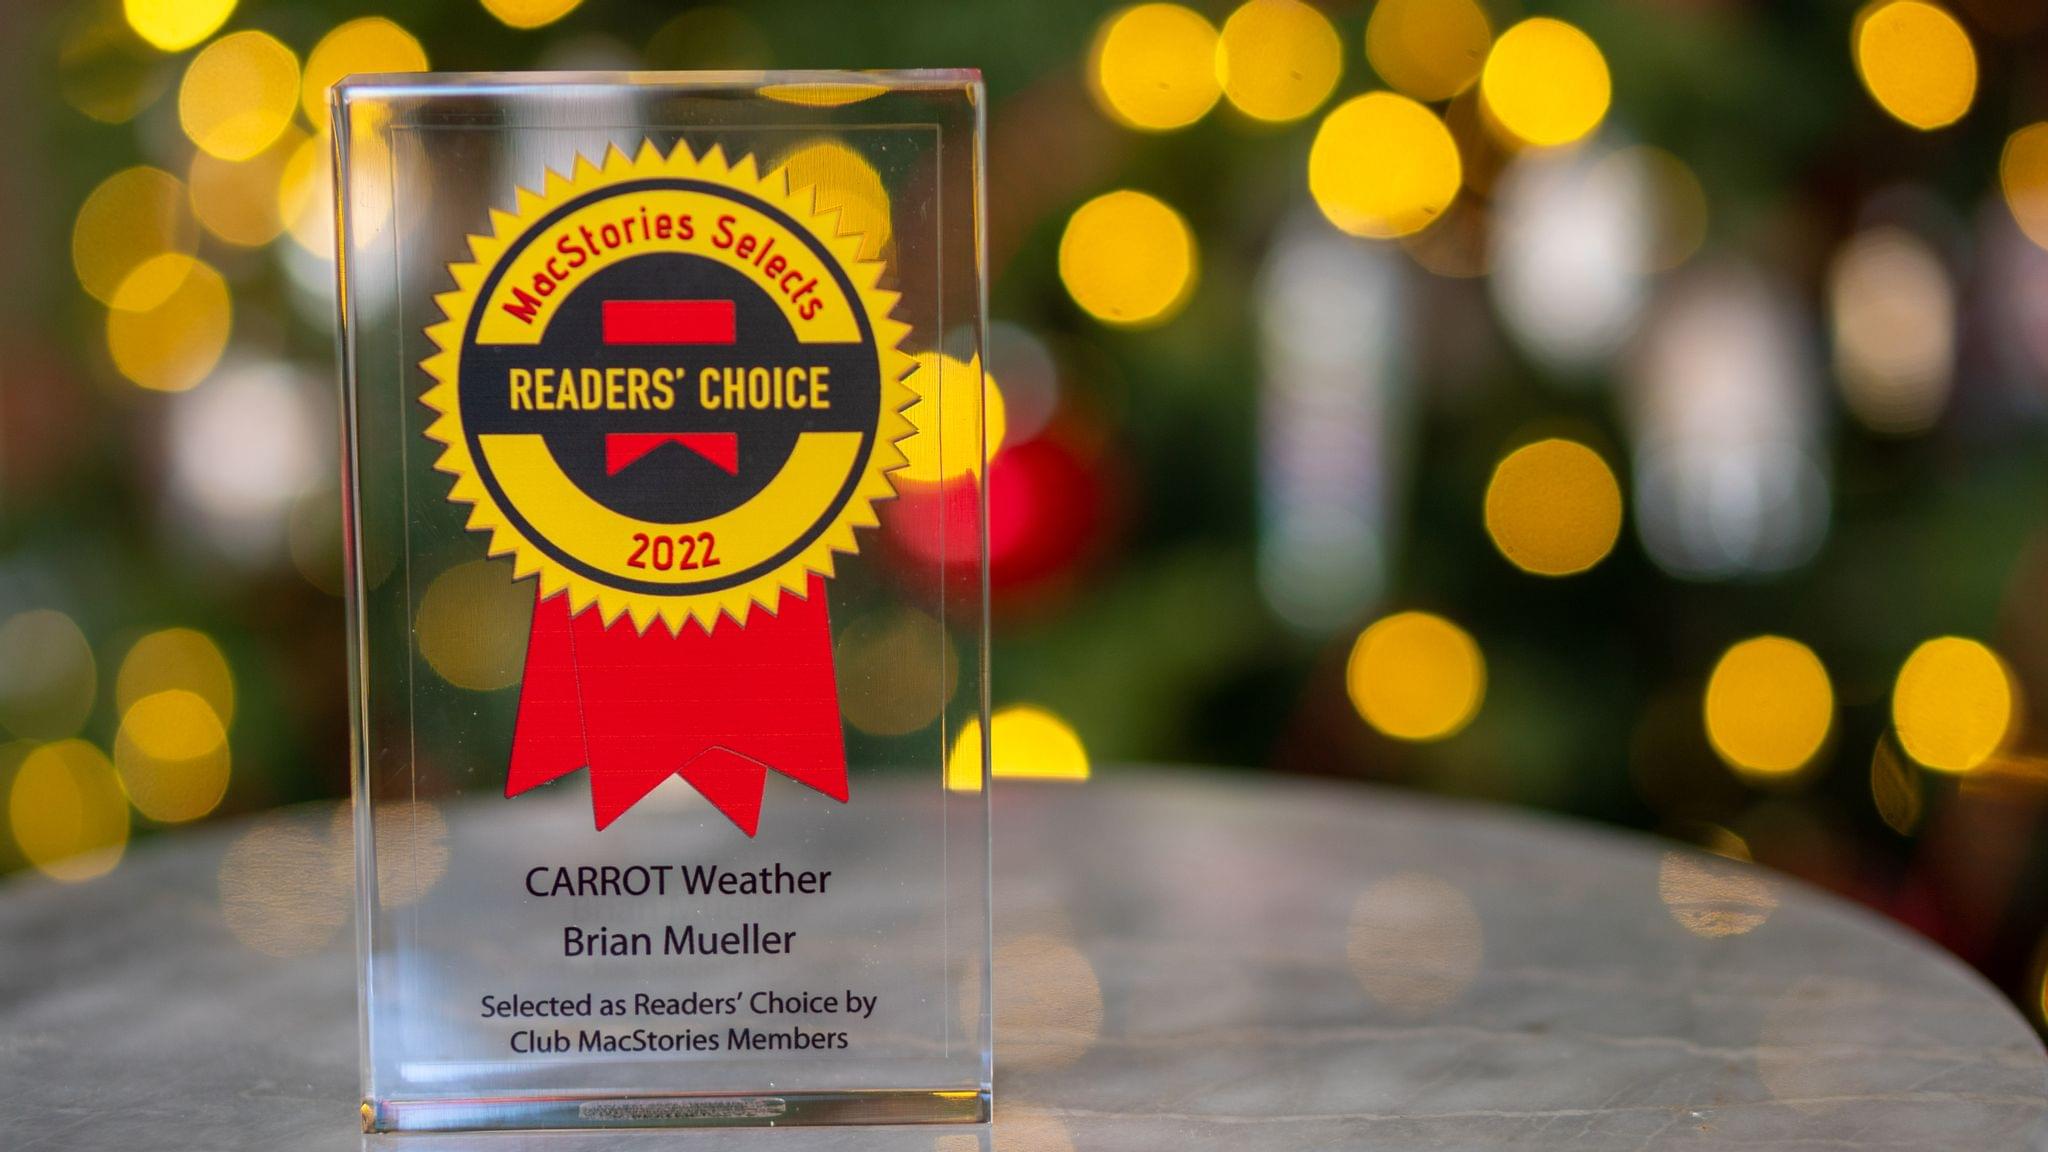 In 2022, Club MacStories members picked CARROT Weather for the Readers’ Choice Award.